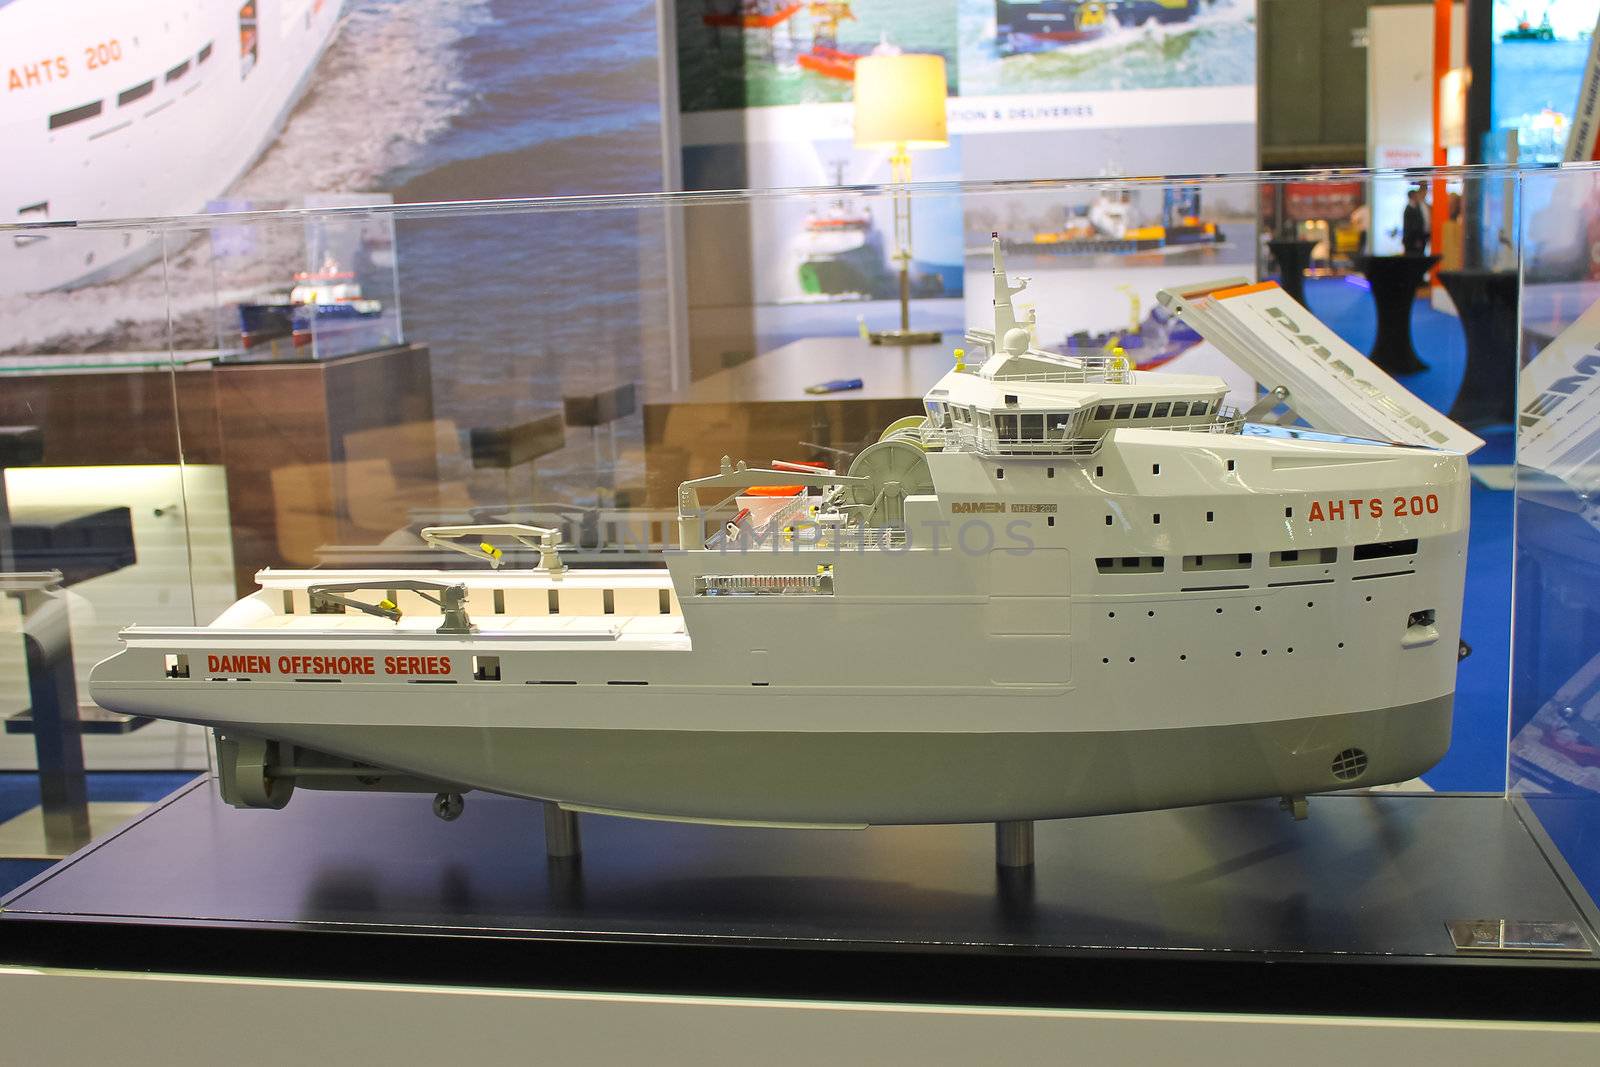 Stand shipbuilding company Damen at the exhibition Offshore Ener by NickNick